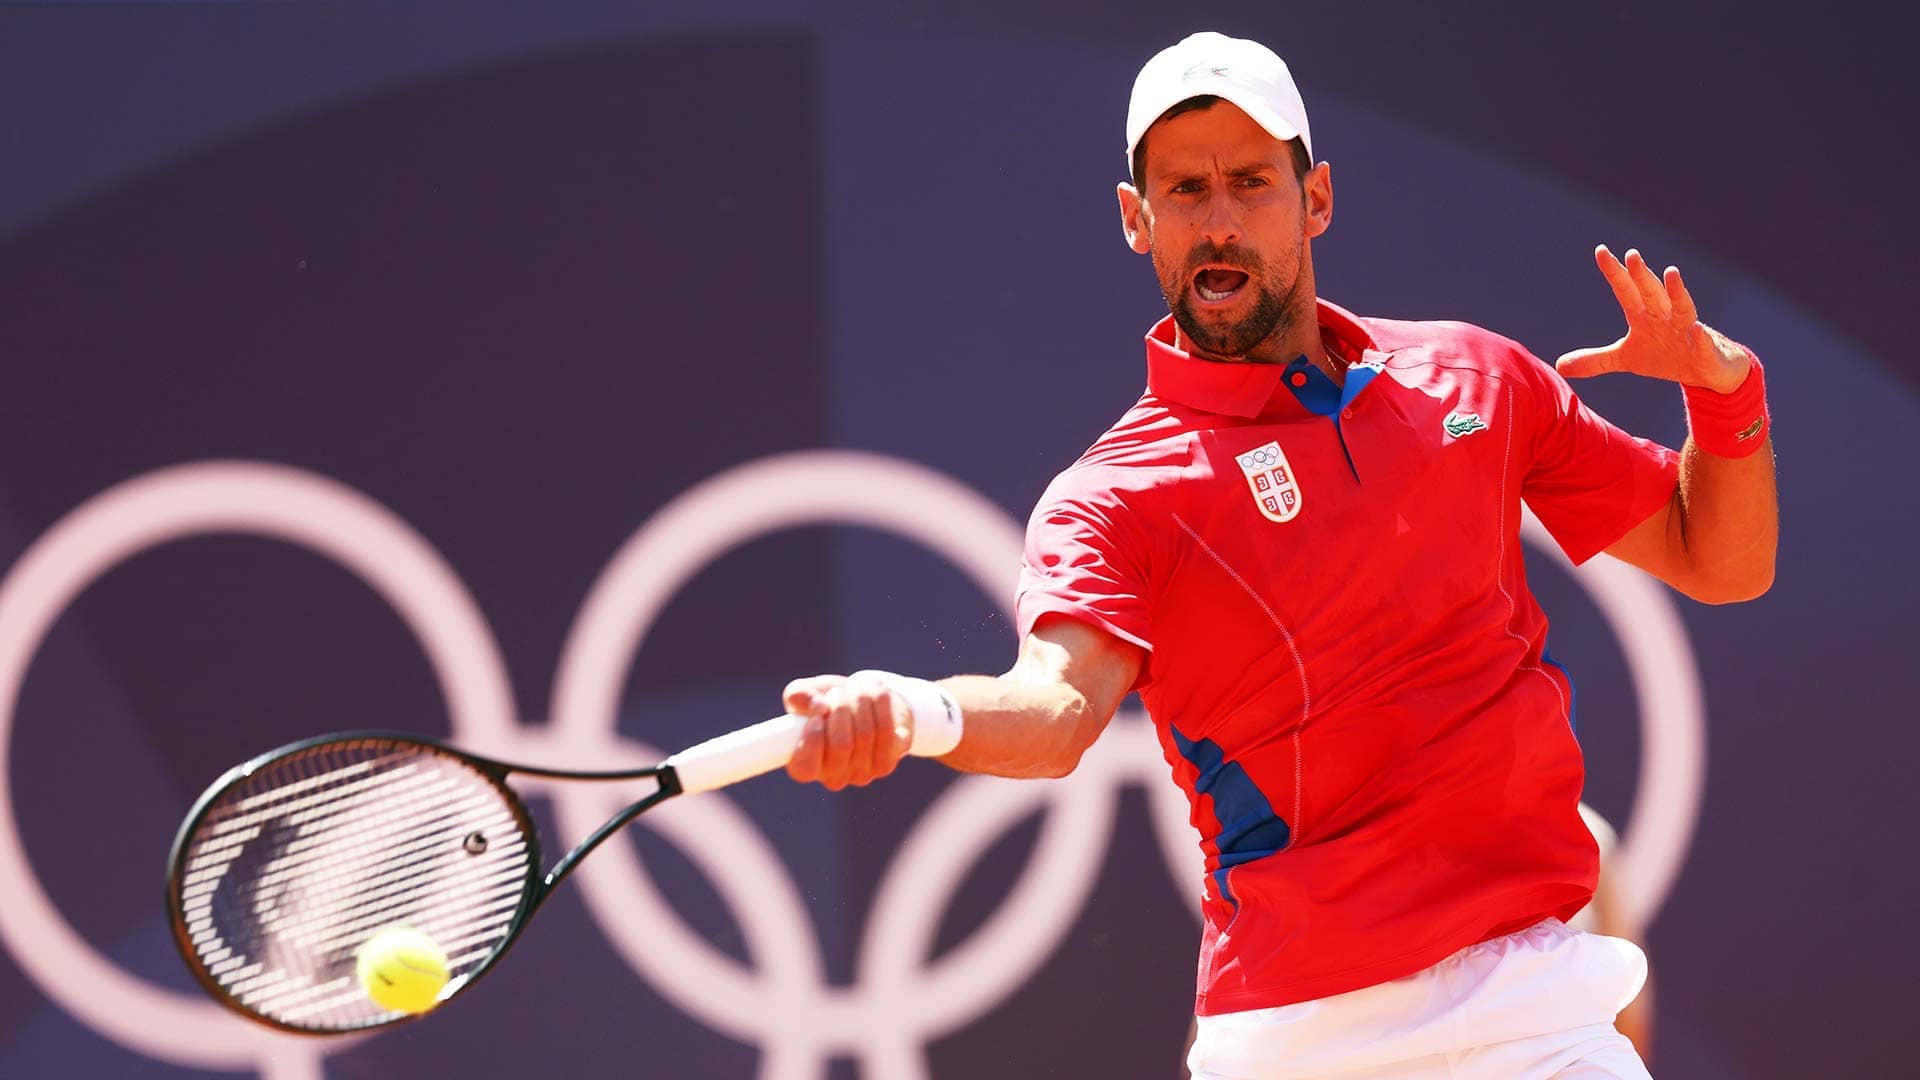 Djokovic defeats Nadal at Paris Olympics, remains on track for first gold medal